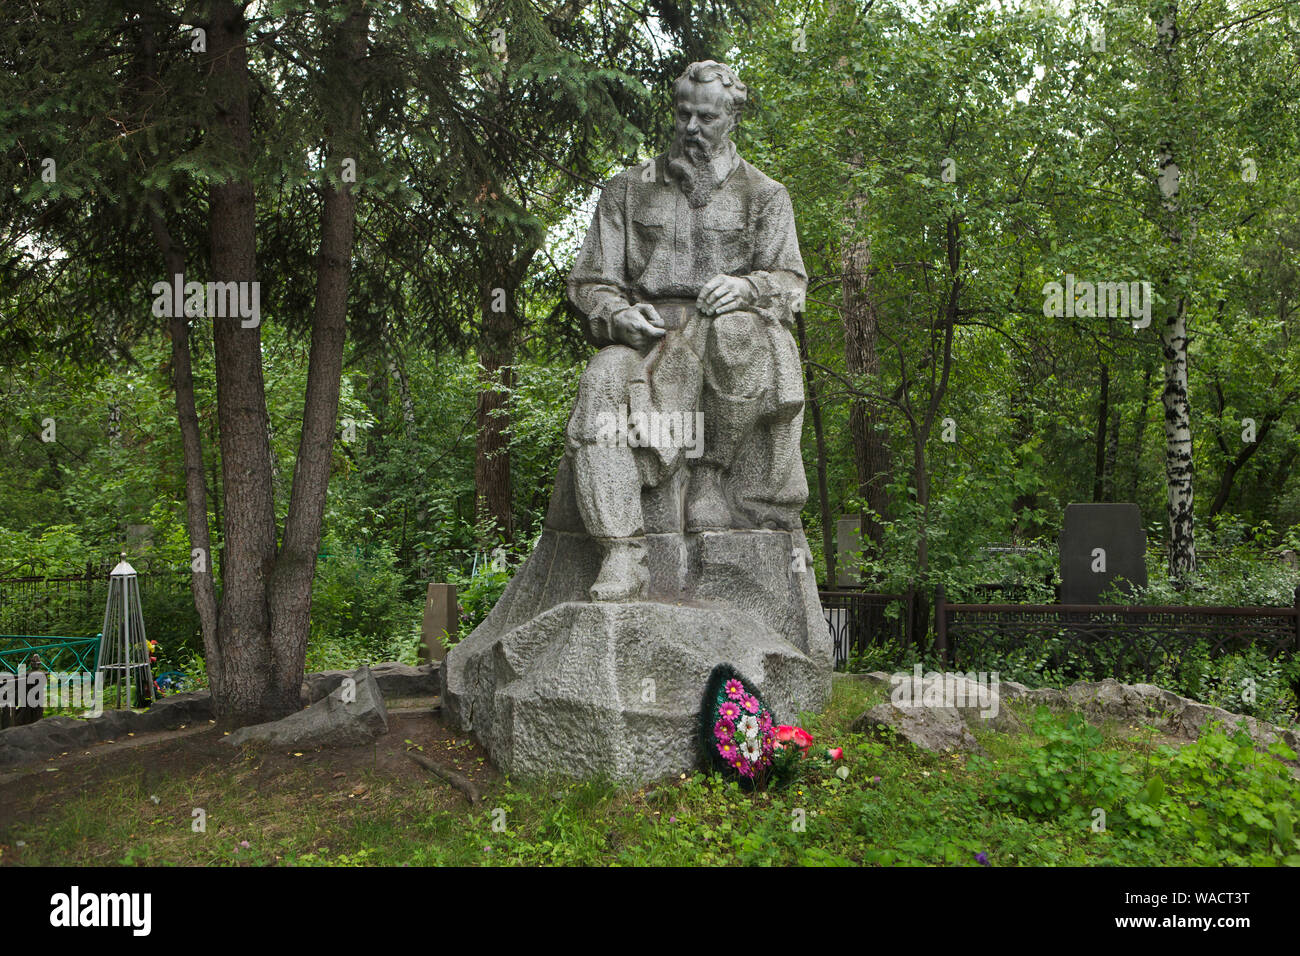 Grave of Russian writer Pavel Bazhov at Ivanovskoye Cemetery in Yekaterinburg, Russia. The statue on the grave was designed by Soviet sculptor Vladimir Yegorov. Stock Photo